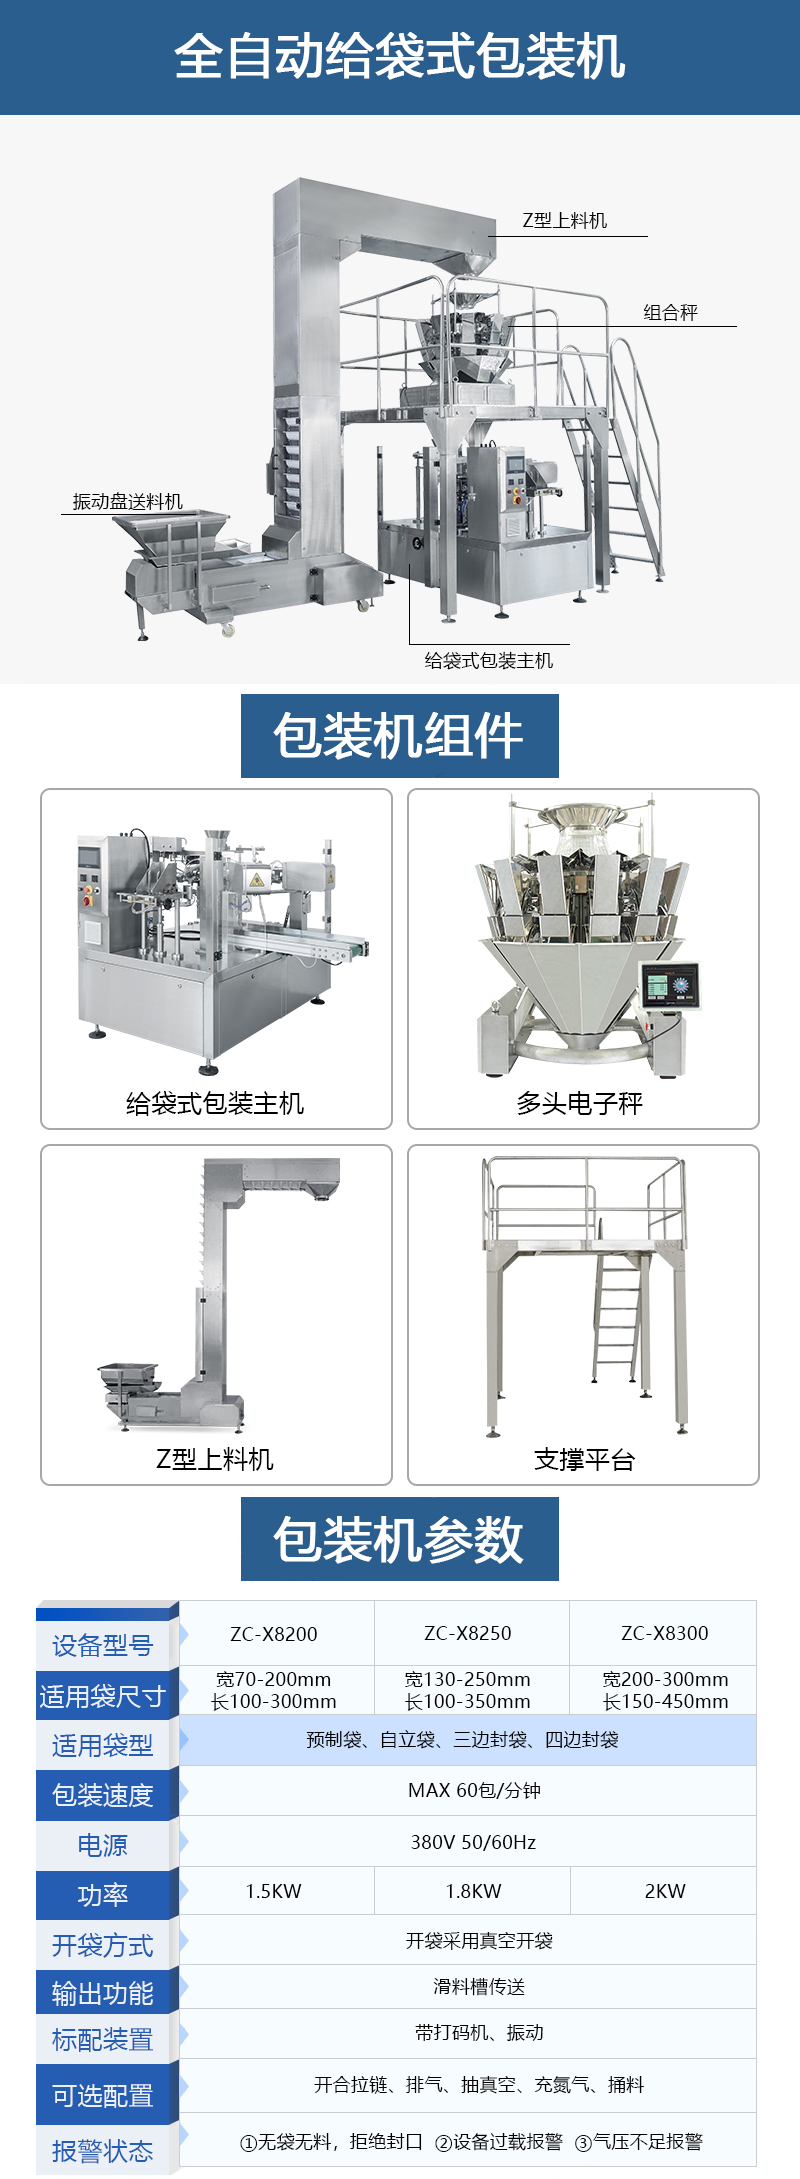 Fully automatic weighing 6L bag pet products Bentonite crystal cat litter Tofu cat litter packaging machine customized by the manufacturer